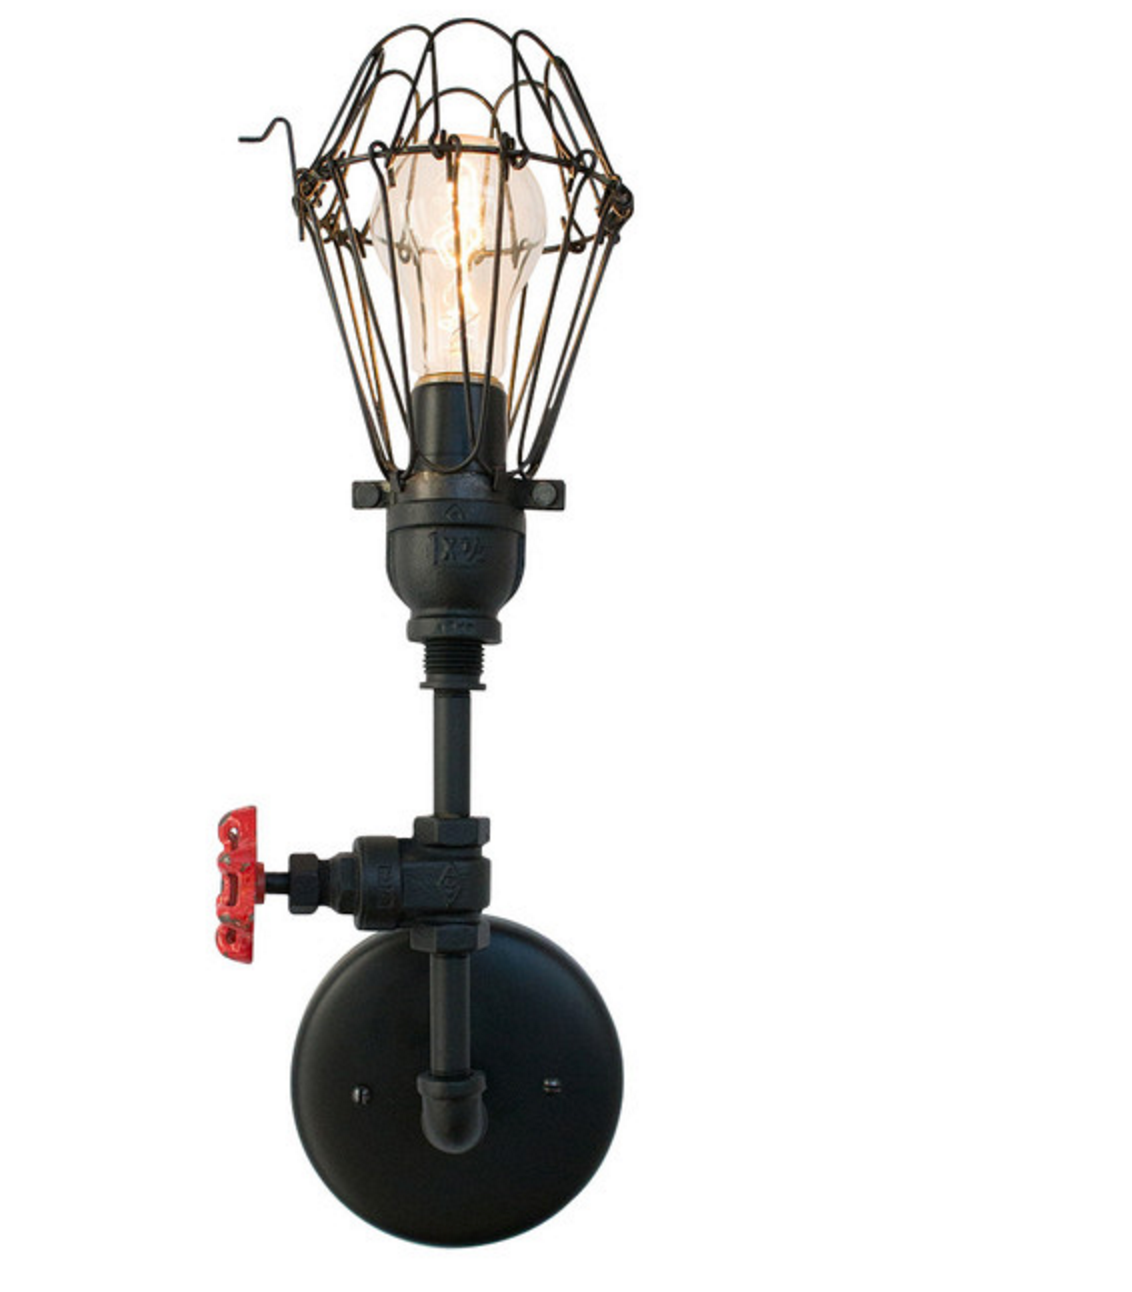 Cage Vintage Valve Pipe Wall Sconce